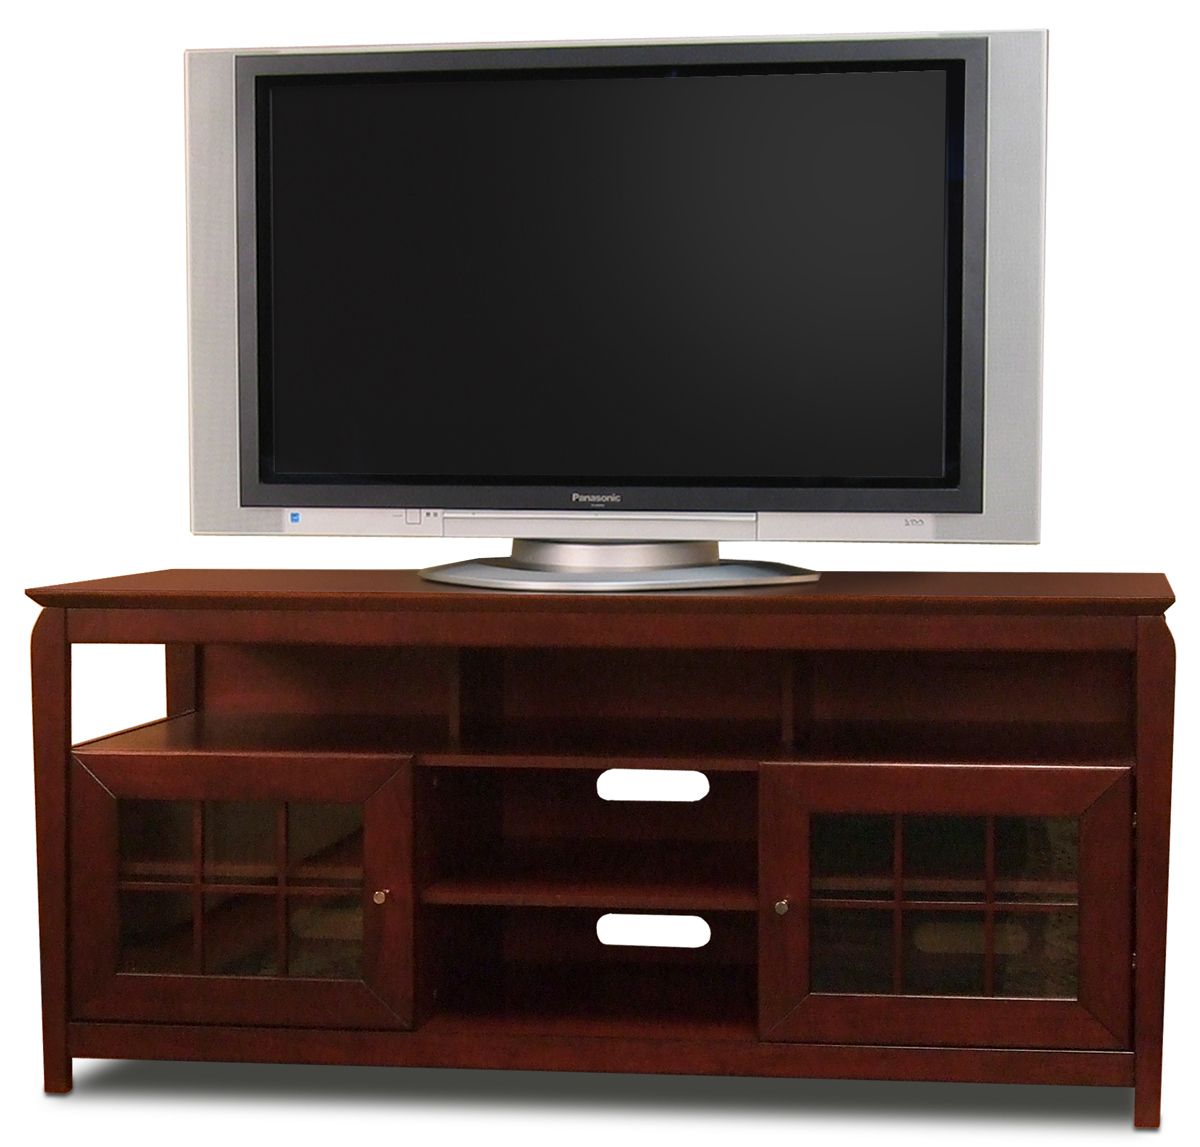 Techcraft Bay6028b Tv Stand Up To 60" Tvs (View 4 of 15)